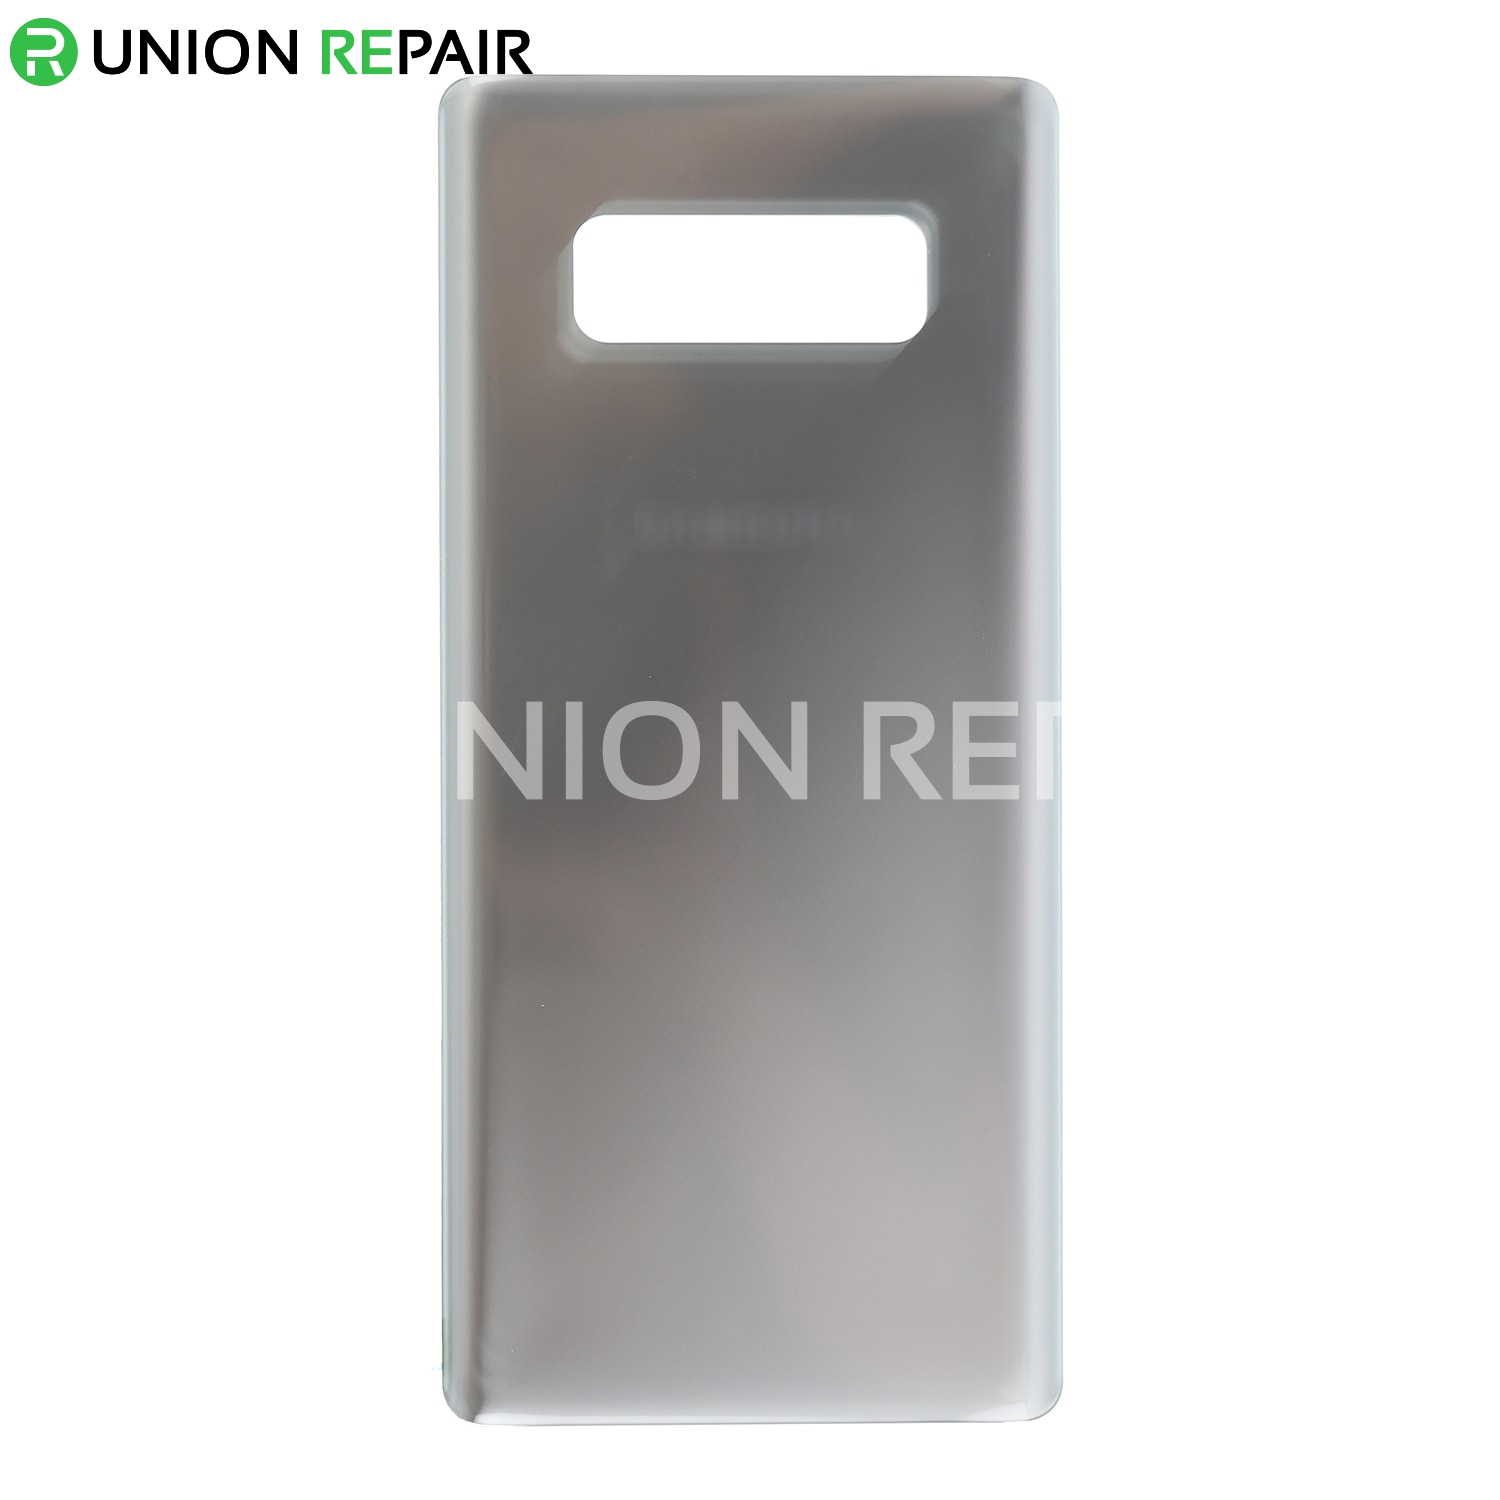 Replacement for Samsung Galaxy Note 8 SM-N950 Back Cover - Silver